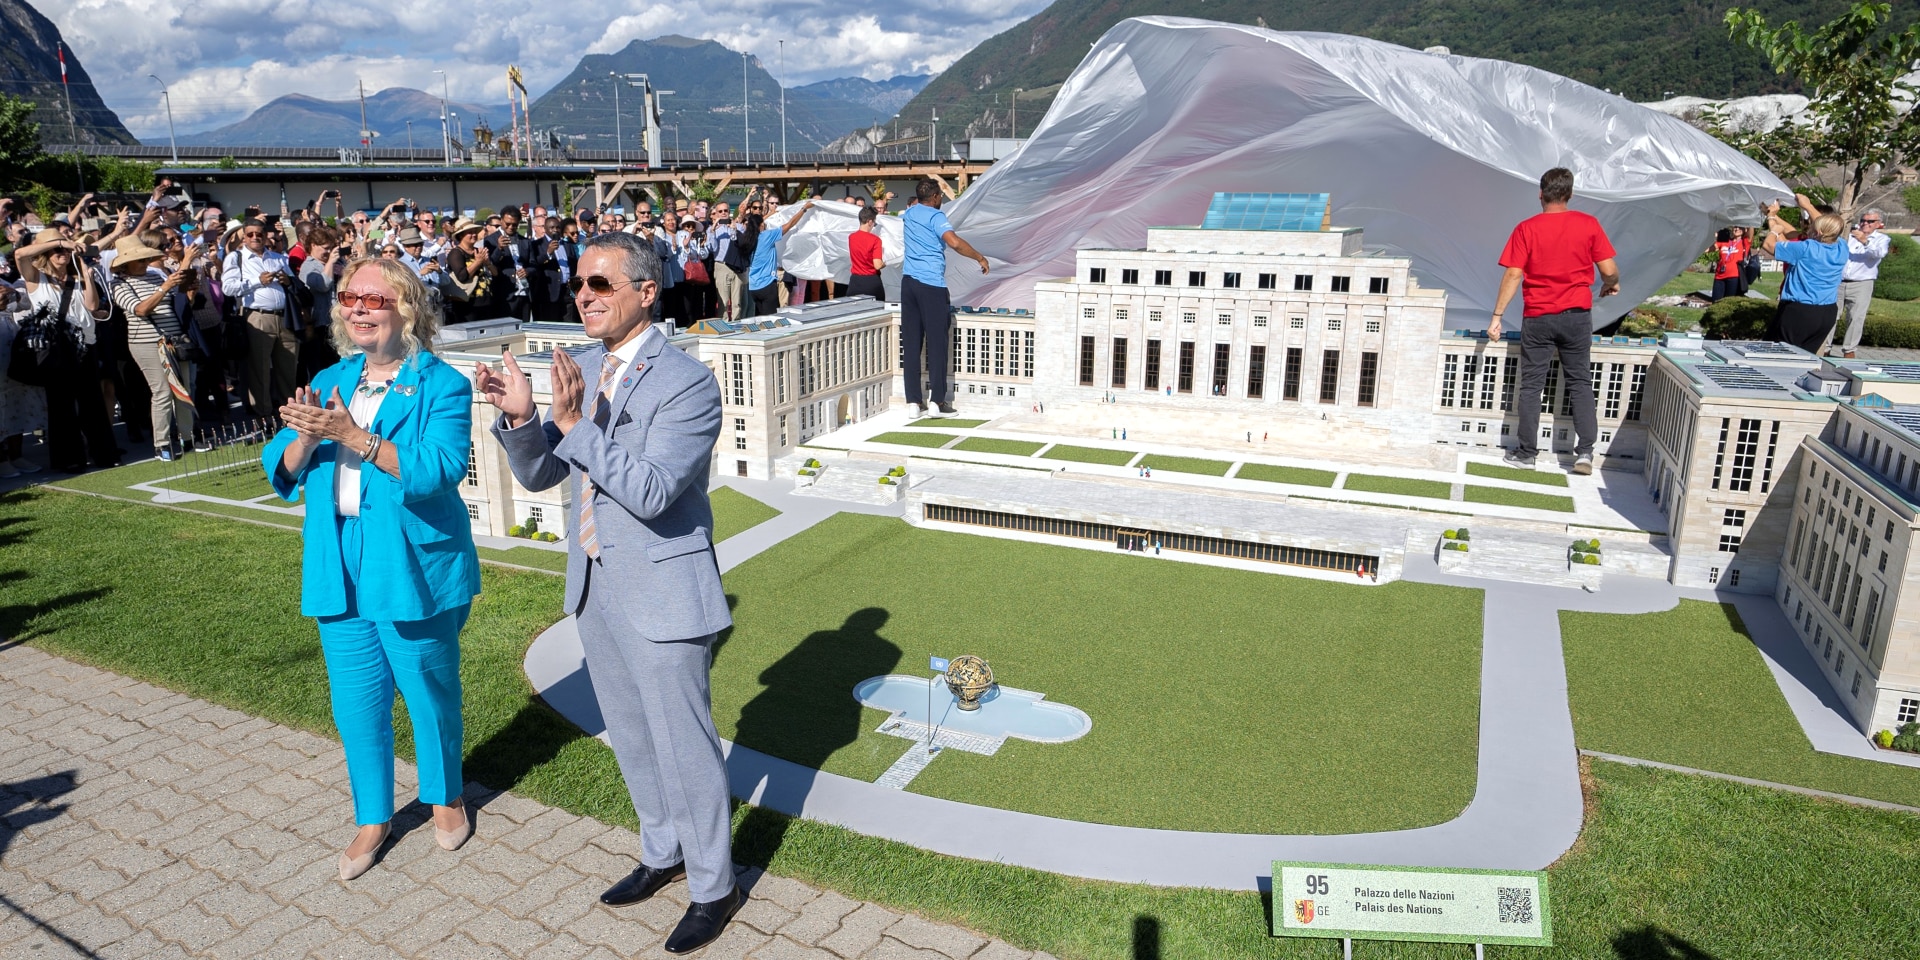 President Cassis inaugurating a Palais des Nations model at Swissminiatur in Melide.